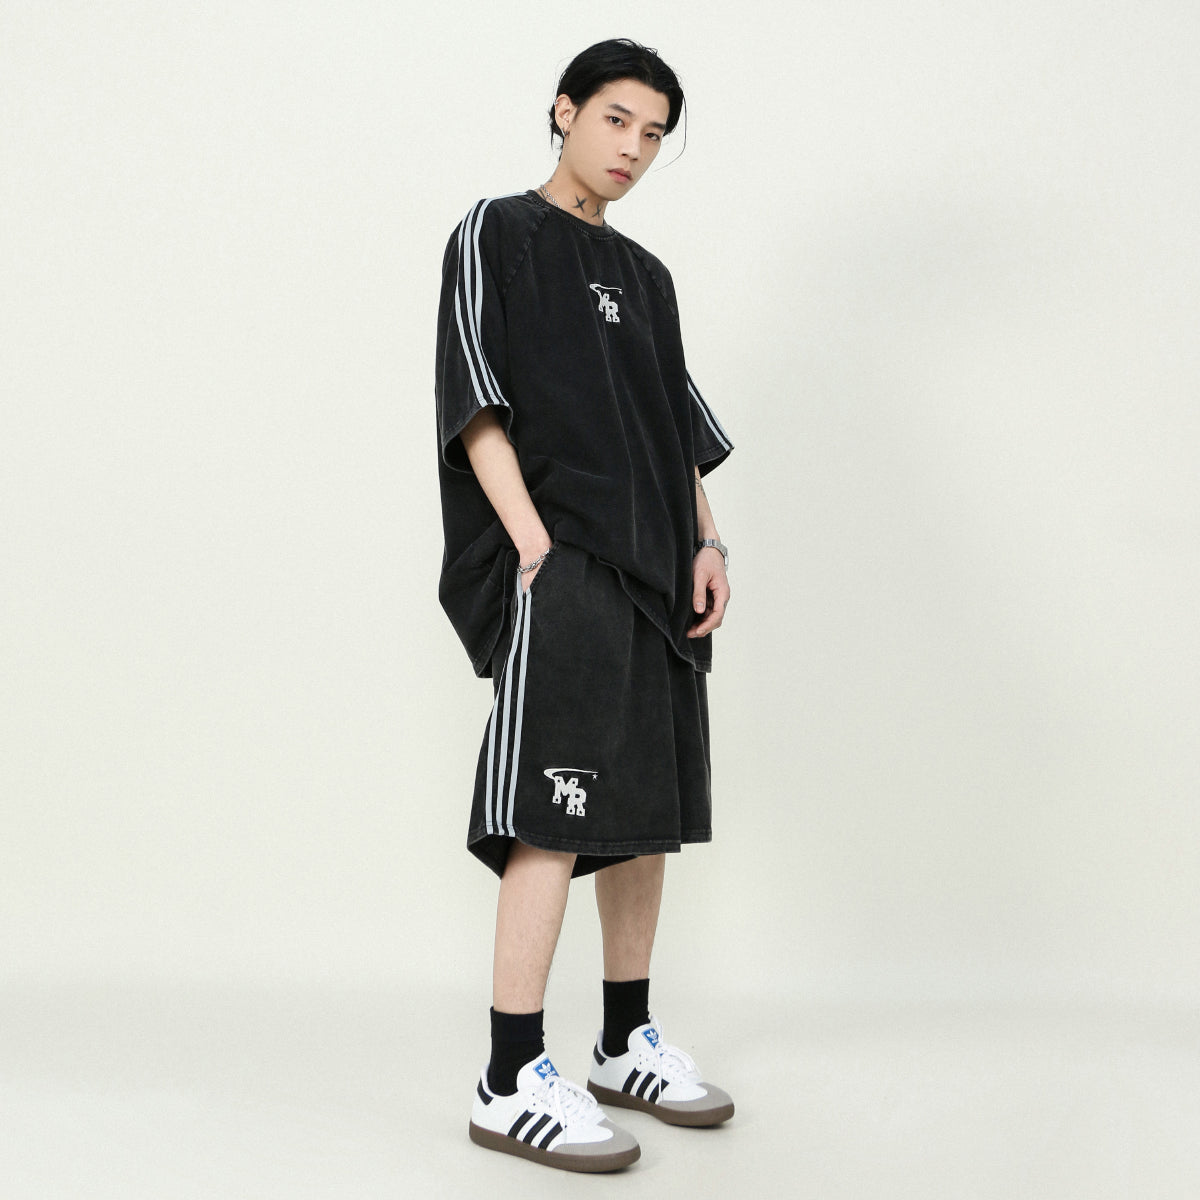 Mr Nearly Sports Logo T-Shirt And Shorts Set Korean Street Fashion Clothing Set By Mr Nearly Shop Online at OH Vault